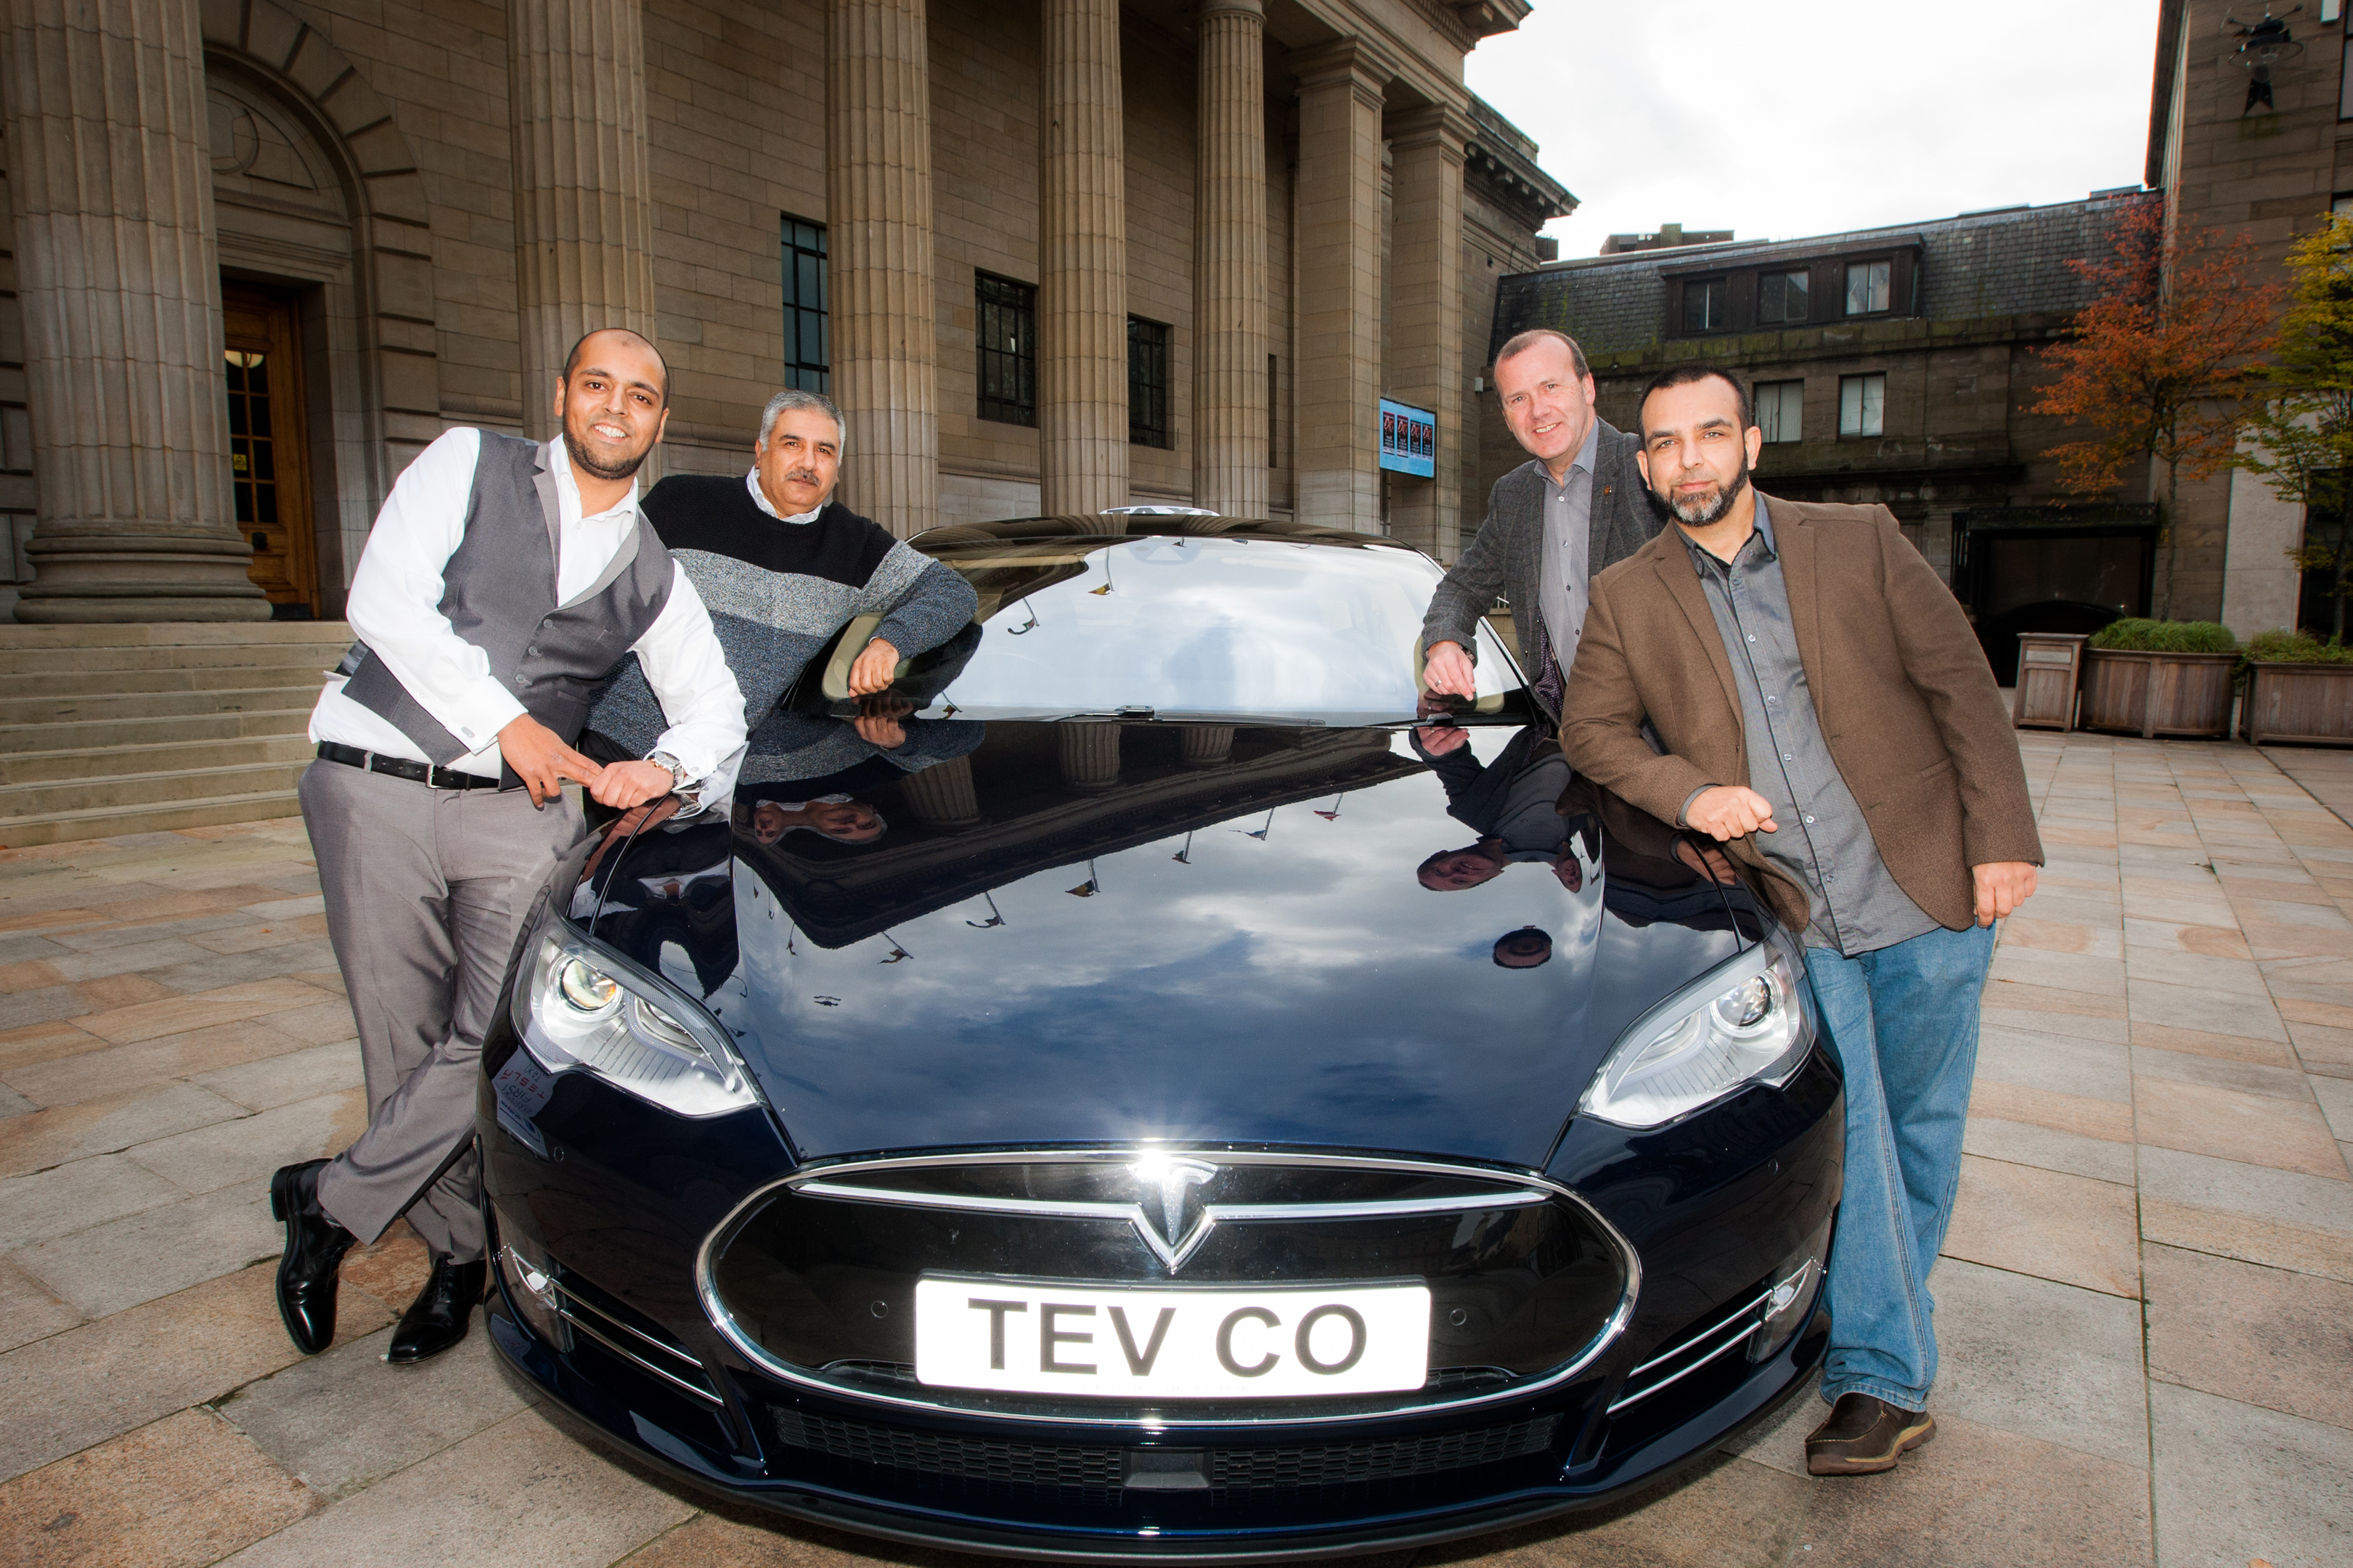 Left to right: Mohammed Zaveri (Director of Tev Co),  Mohammed Hashmi (President of Dundee City Taxi Driver Association), Councillor Mark Flynn and Qaiser Habib Qadri (vice president of Dundee City Taxi Driver Association)